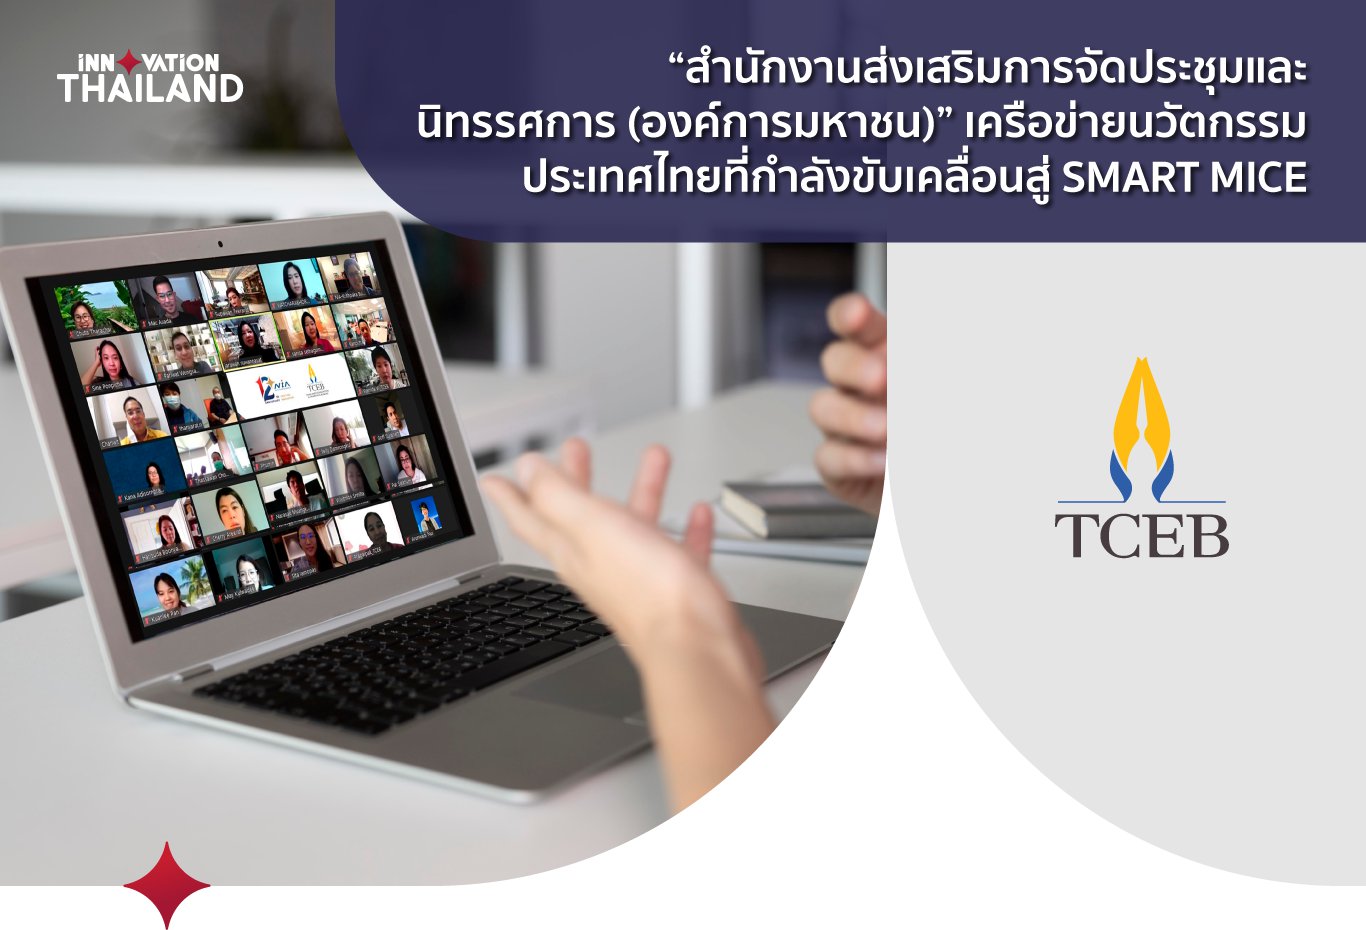 Meet the Thailand Convention and Exhibition Bureau (Public Organization) Innovation Thailand Alliance that is driving towards SMART MICE